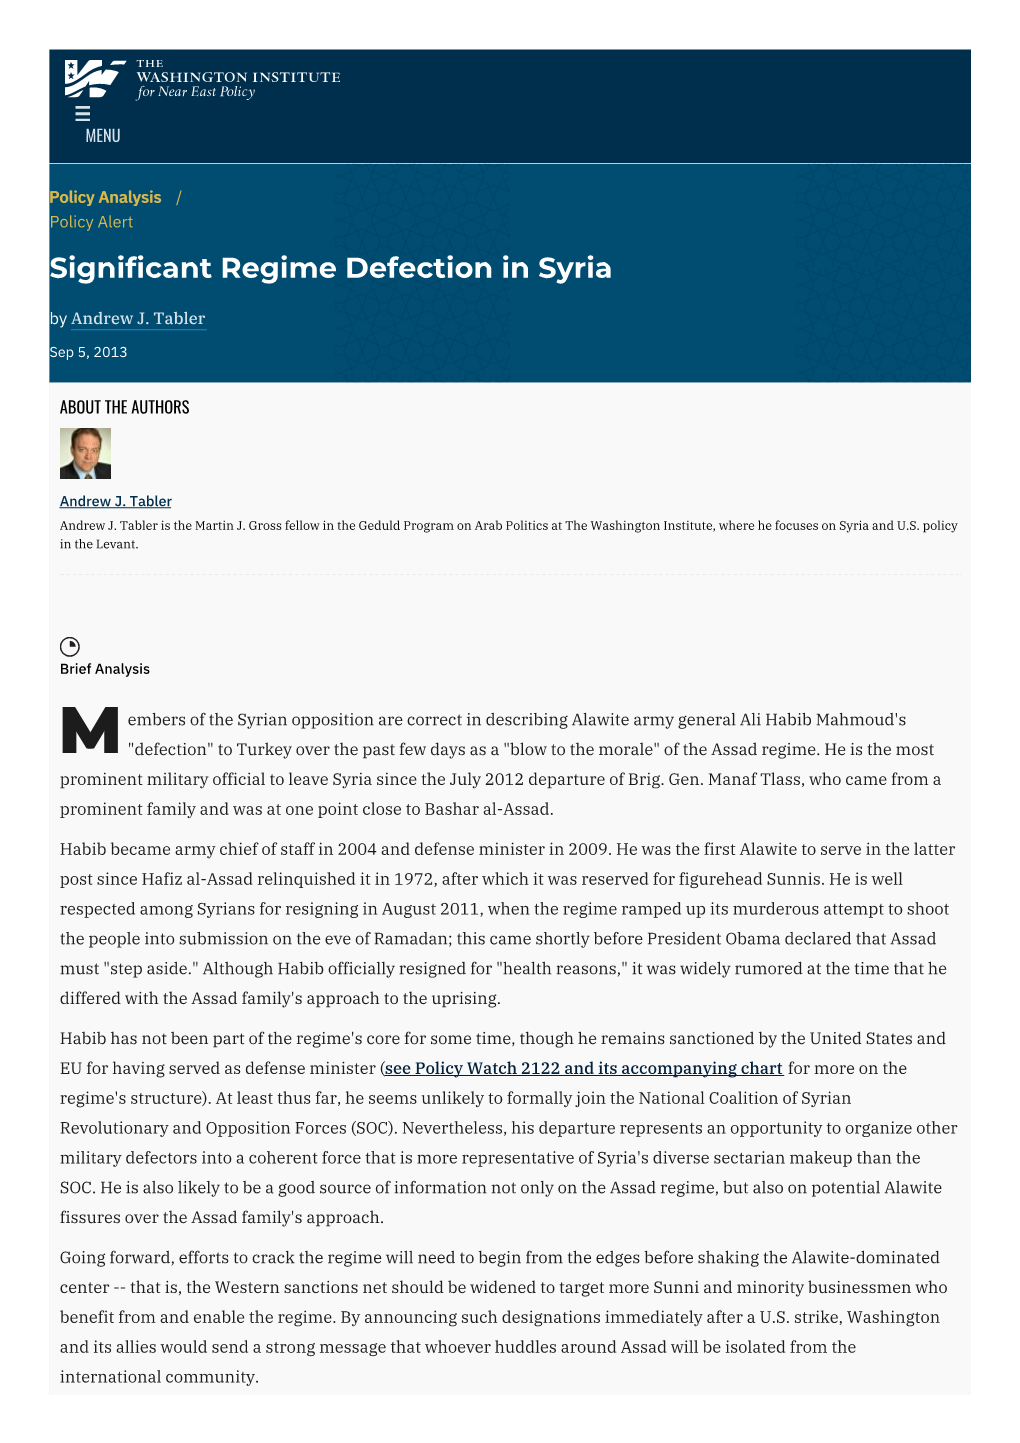 Significant Regime Defection in Syria | the Washington Institute